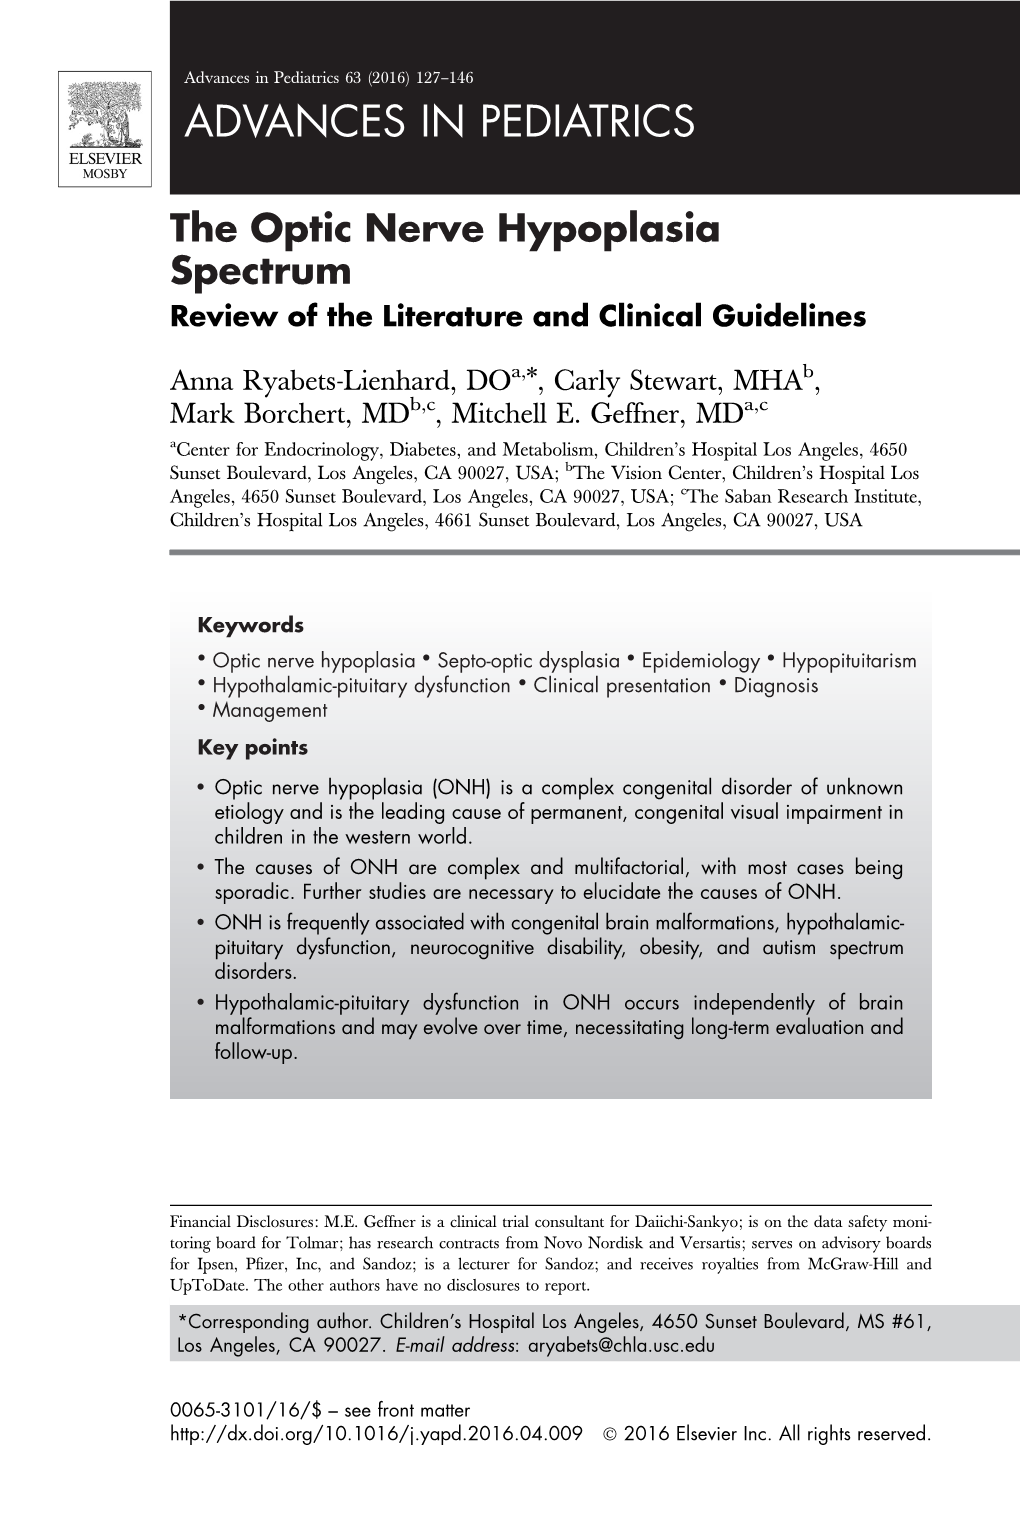 The Optic Nerve Hypoplasia Spectrum Review of the Literature and Clinical Guidelines